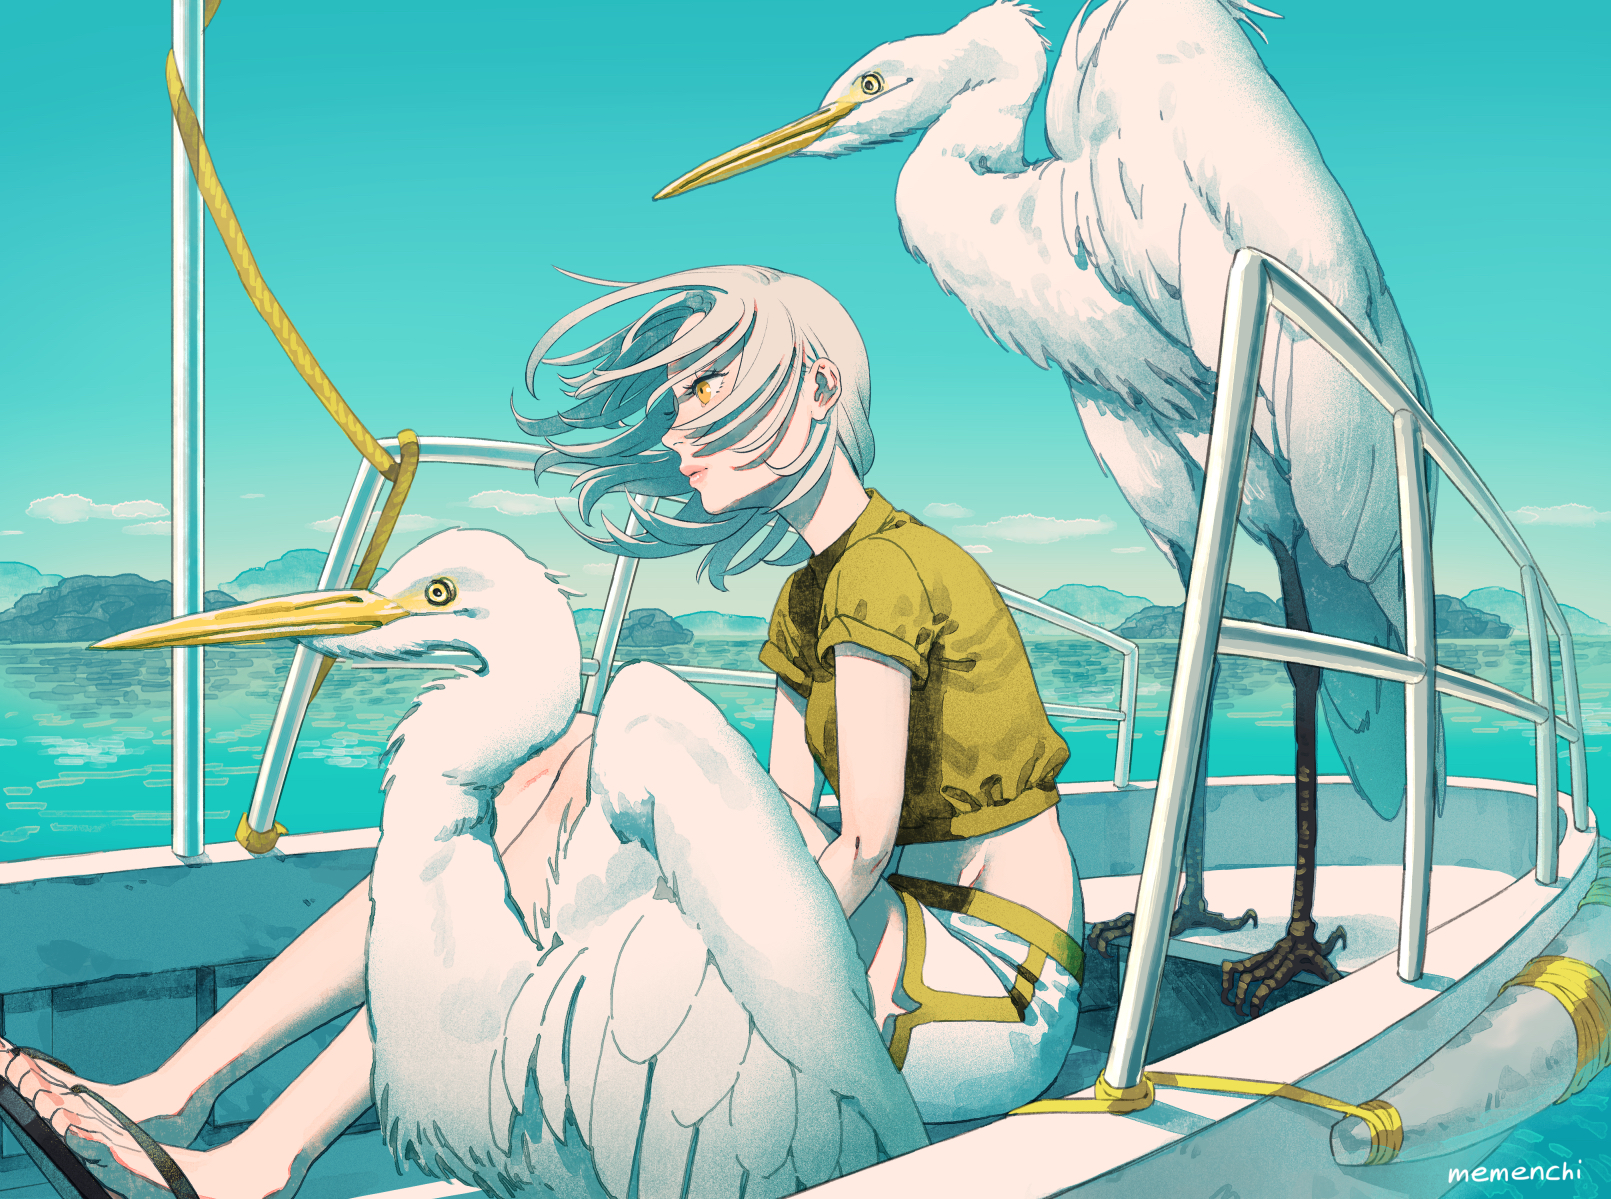 Anime 1611x1199 anime anime girls yellow eyes boat sea yellow shirt looking away Aburage original characters women outdoors ocean view long hair white hair 2D sandals crop top pink lipstick short shorts seagulls belly hair blowing in the wind cyan